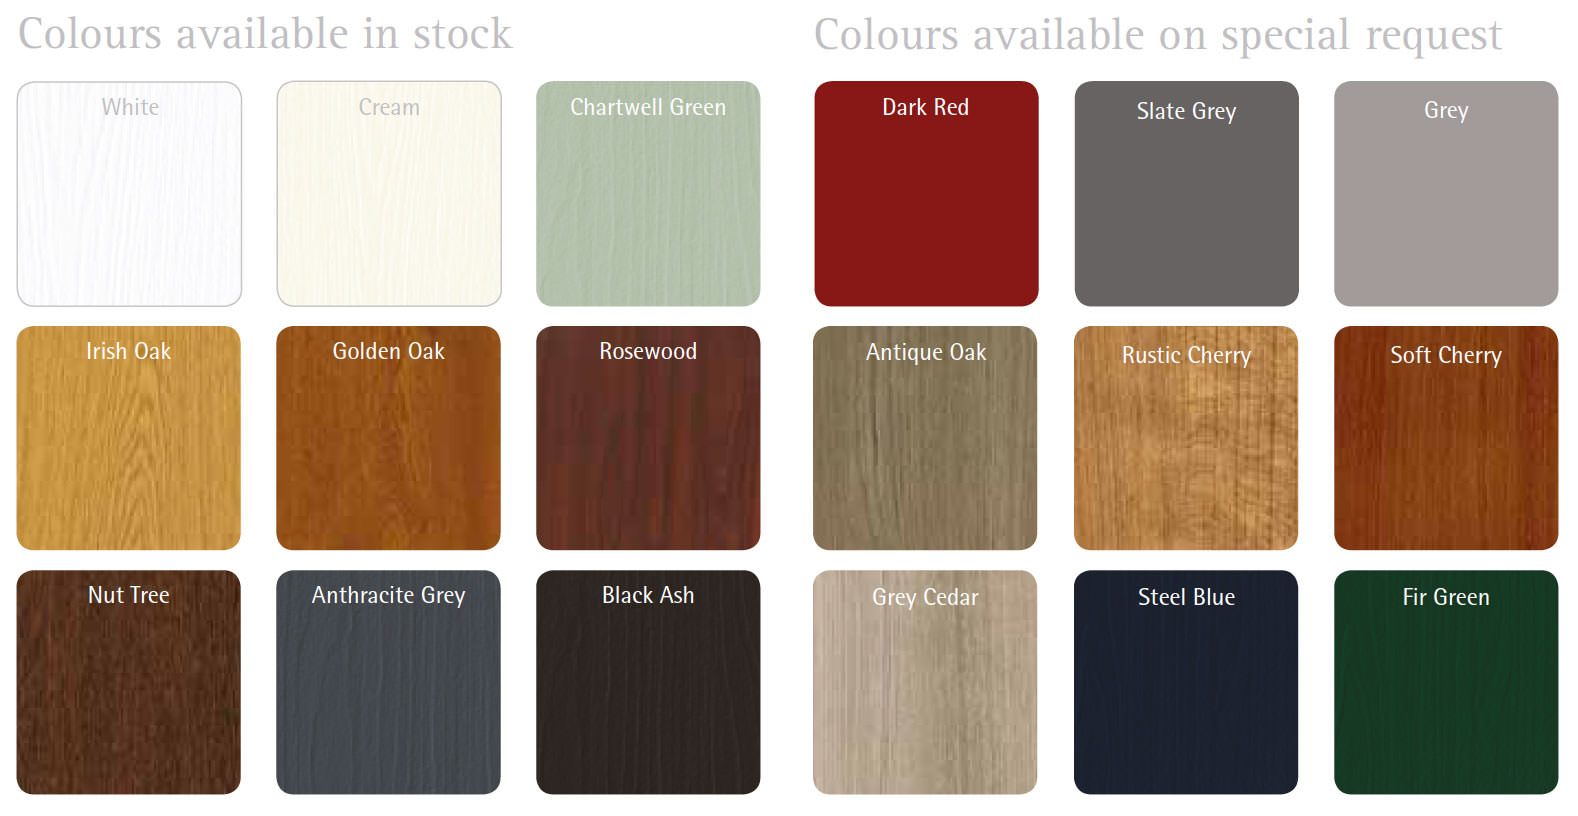 Product Colour Options